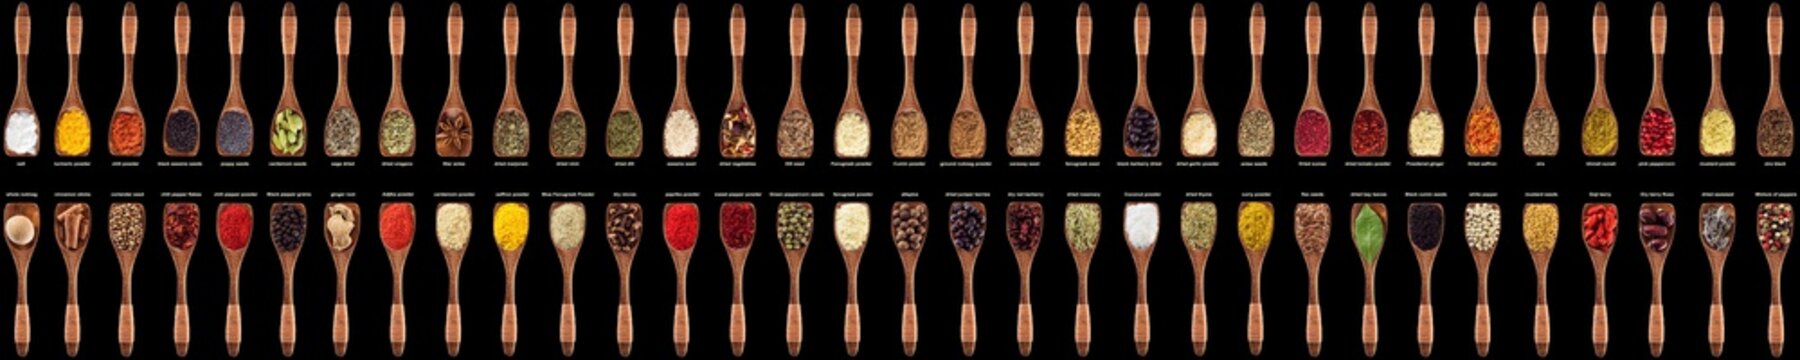 colorful spices and herbs in wooden spoons. seasoning isolated on black background. condiments for food from all over the world